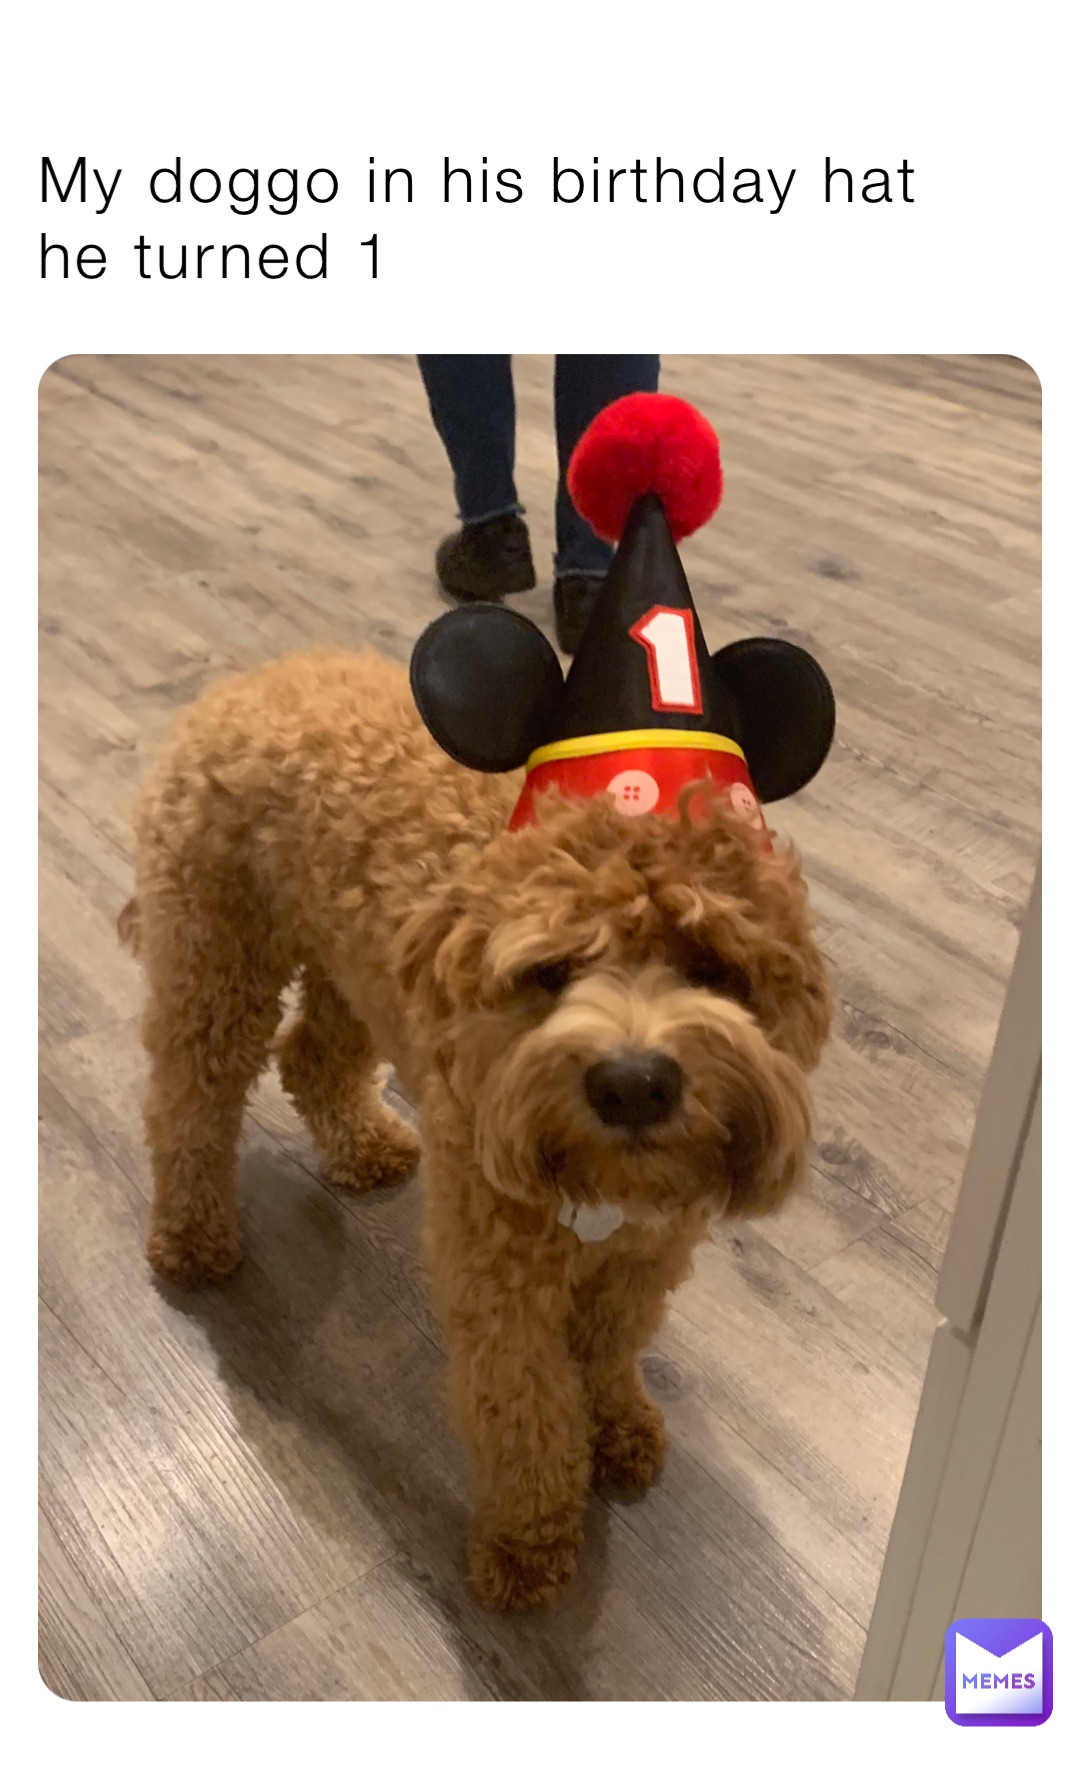 My doggo in his birthday hat he turned 1